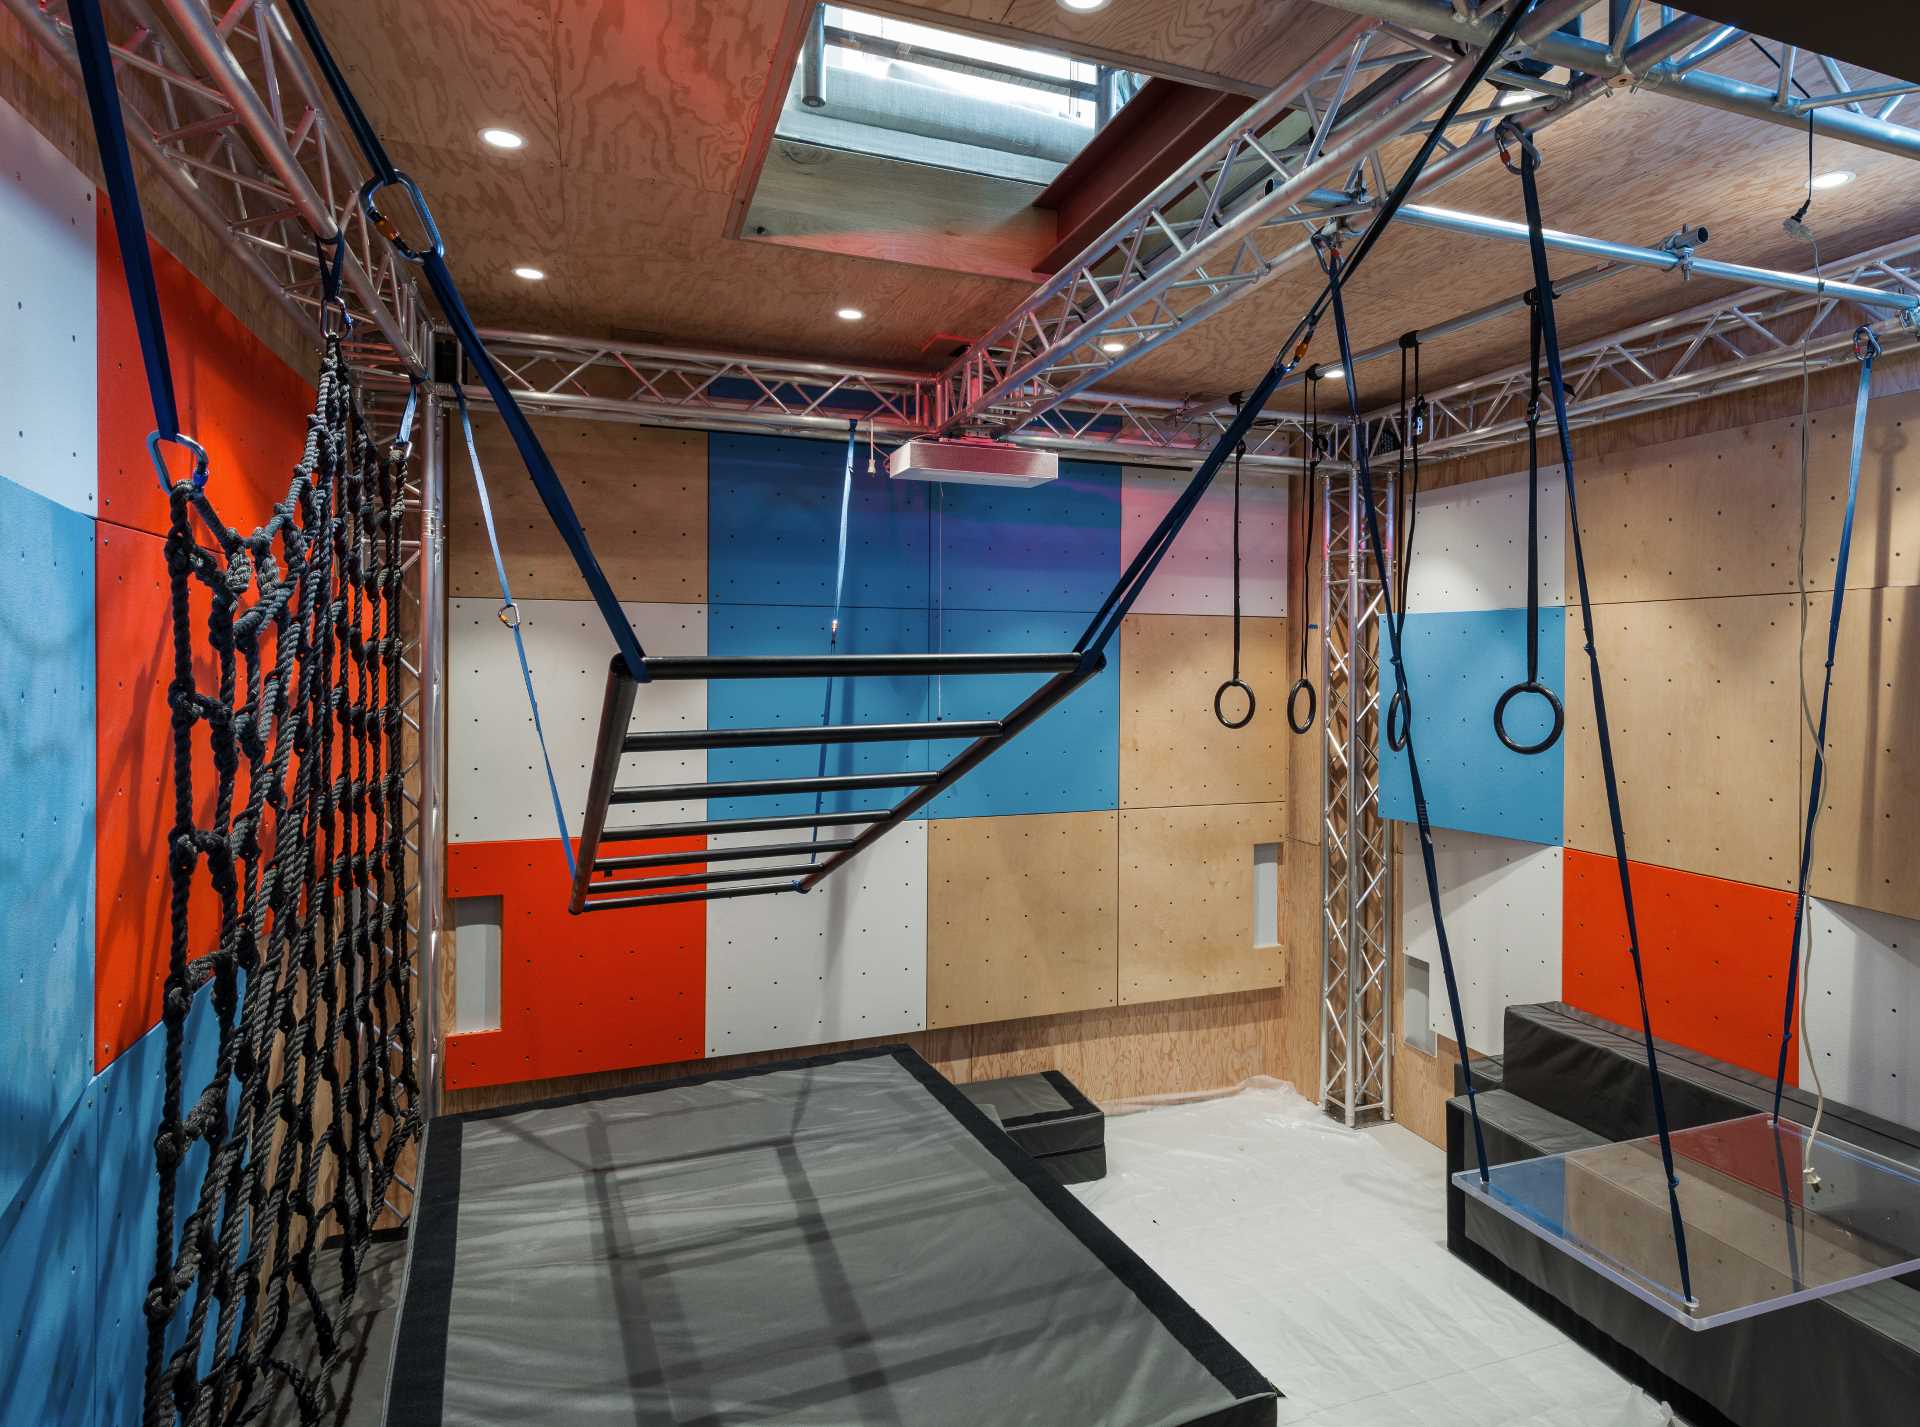 A home with a Ninja Room, which features climbing walls and spaceframes, hammocks, swings, and ropes. A ‘floor window’ in the living room peeks into the ninja room below.